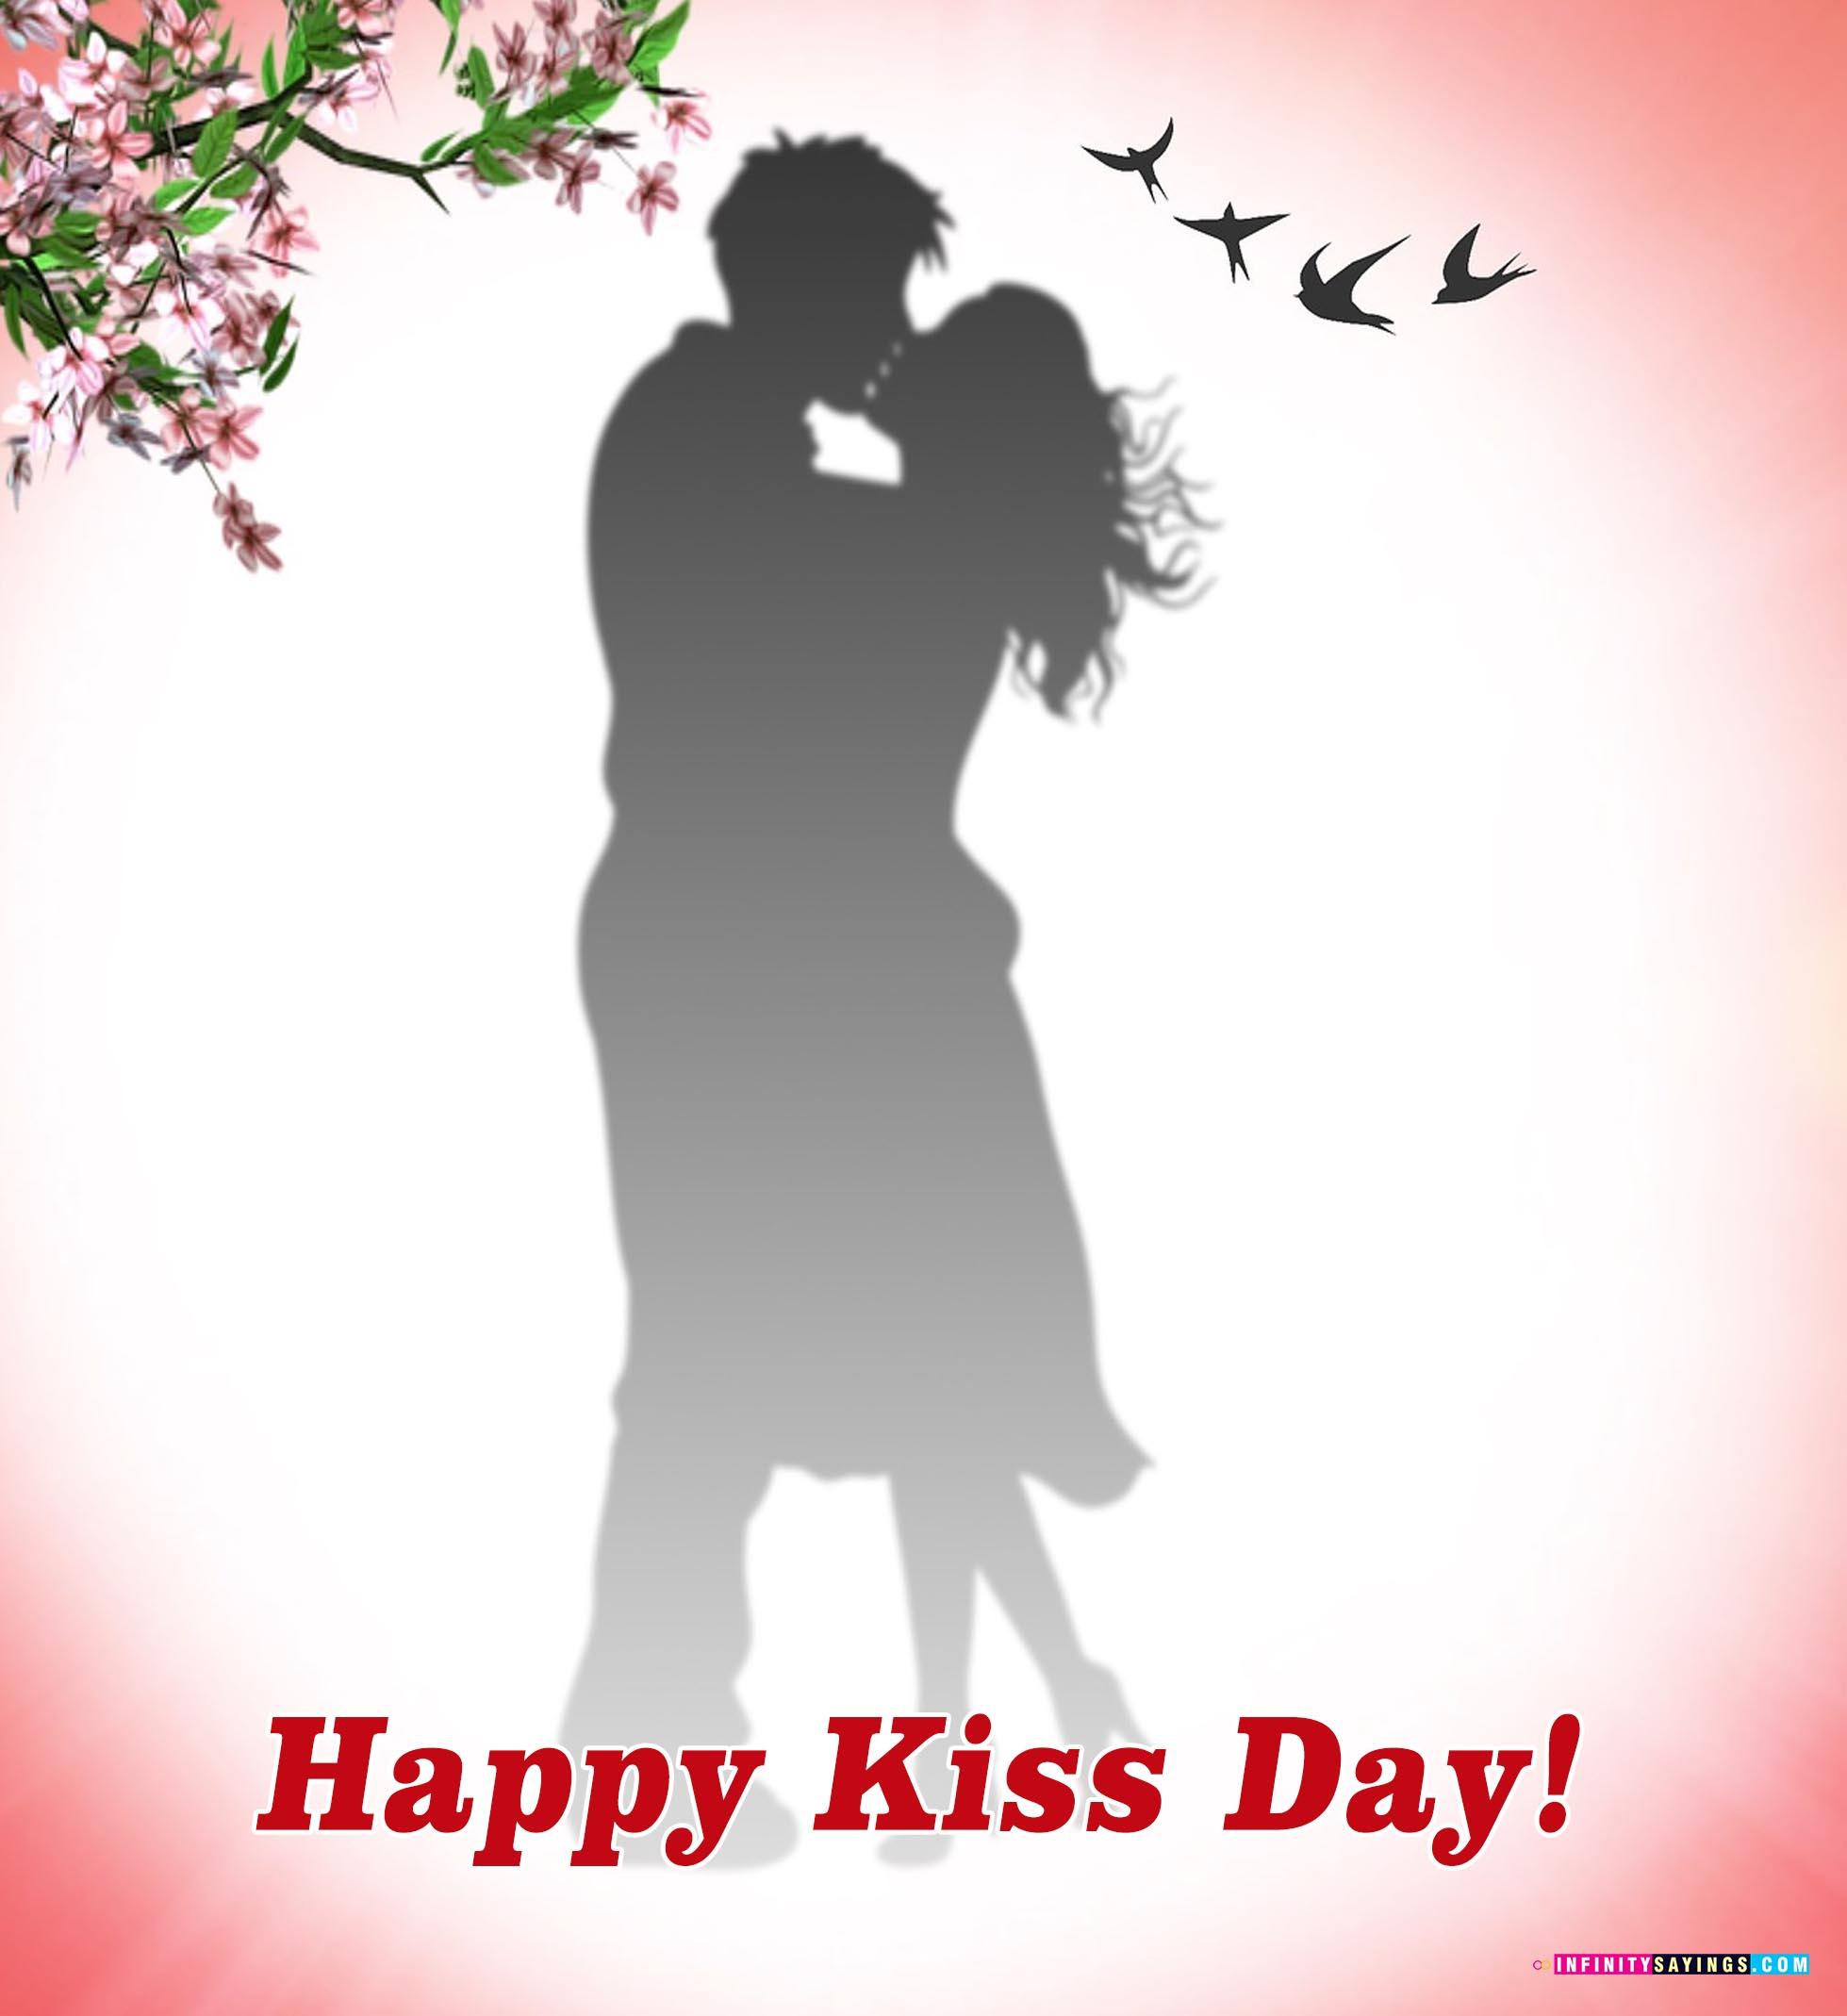 Kiss Day Quotes 2019 Wishes HD Picture Greetings For